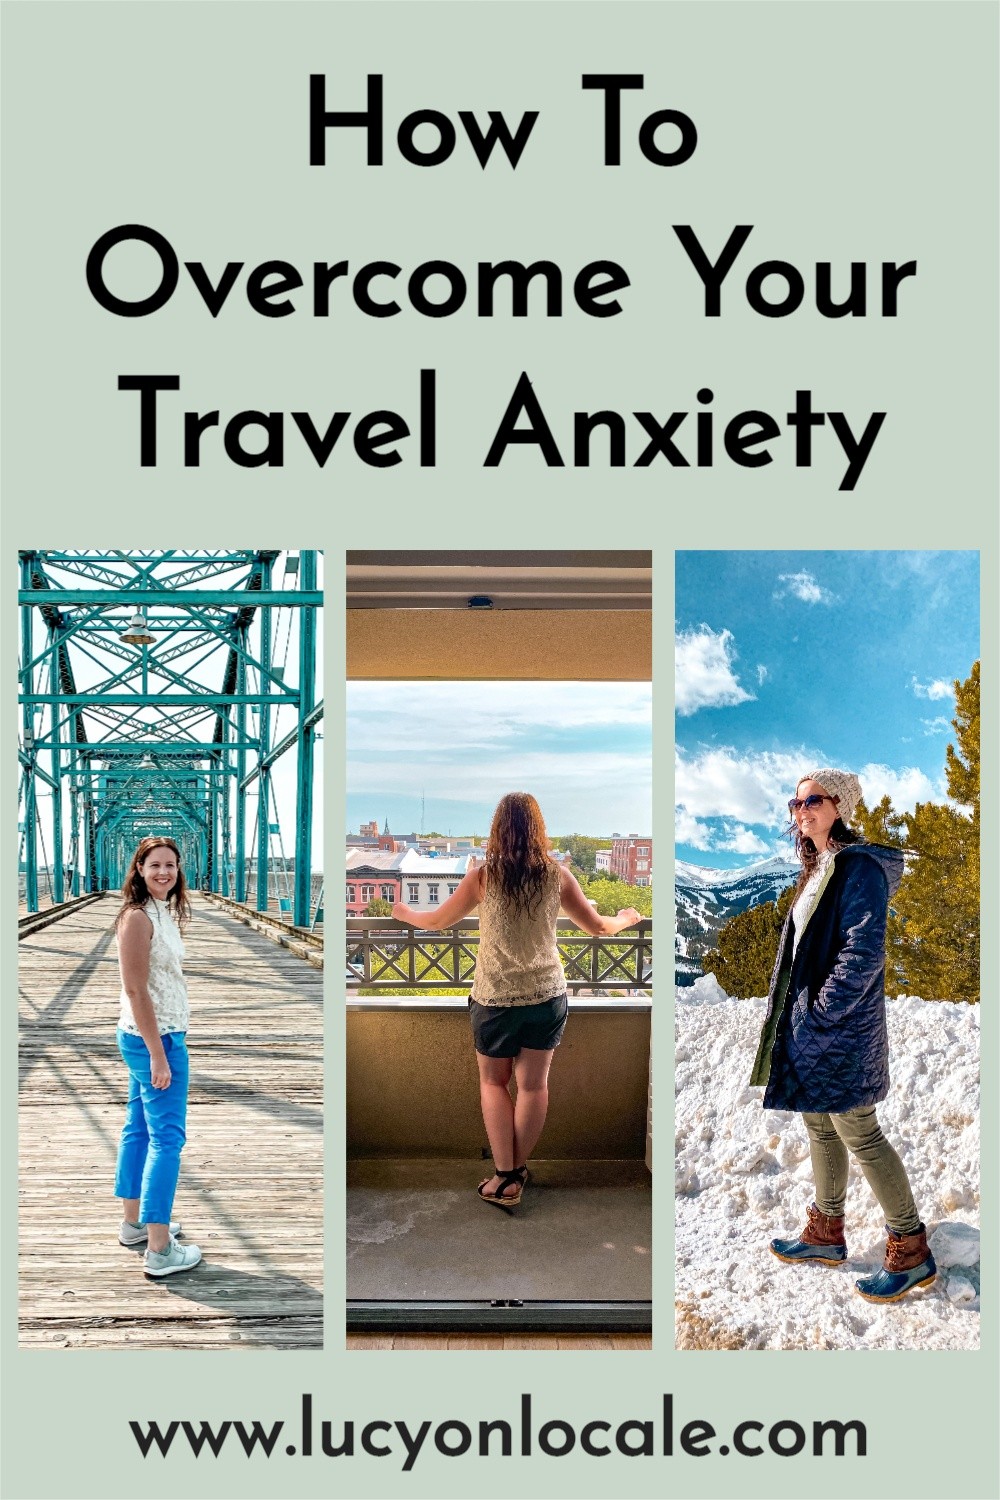 How to overcome your travel anxiety